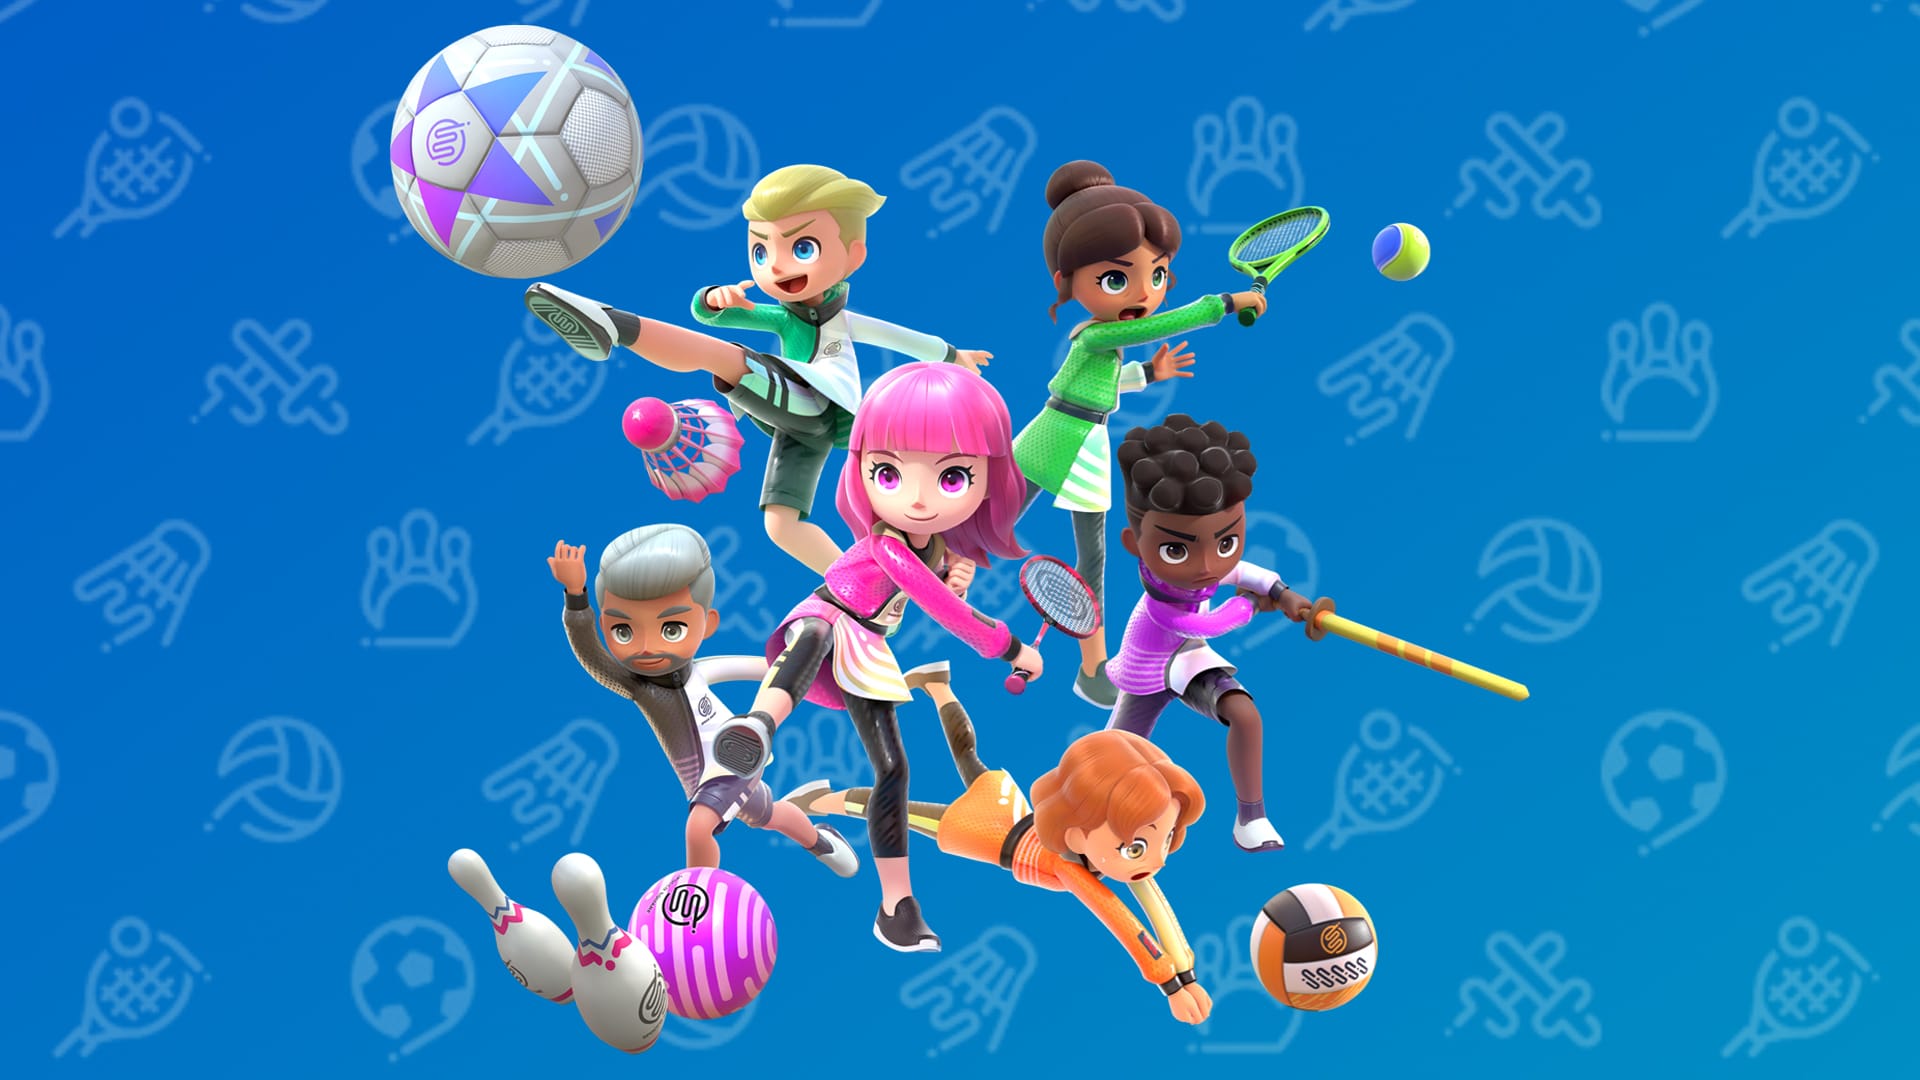 Wii Sports returns as Nintendo Switch Sports this April